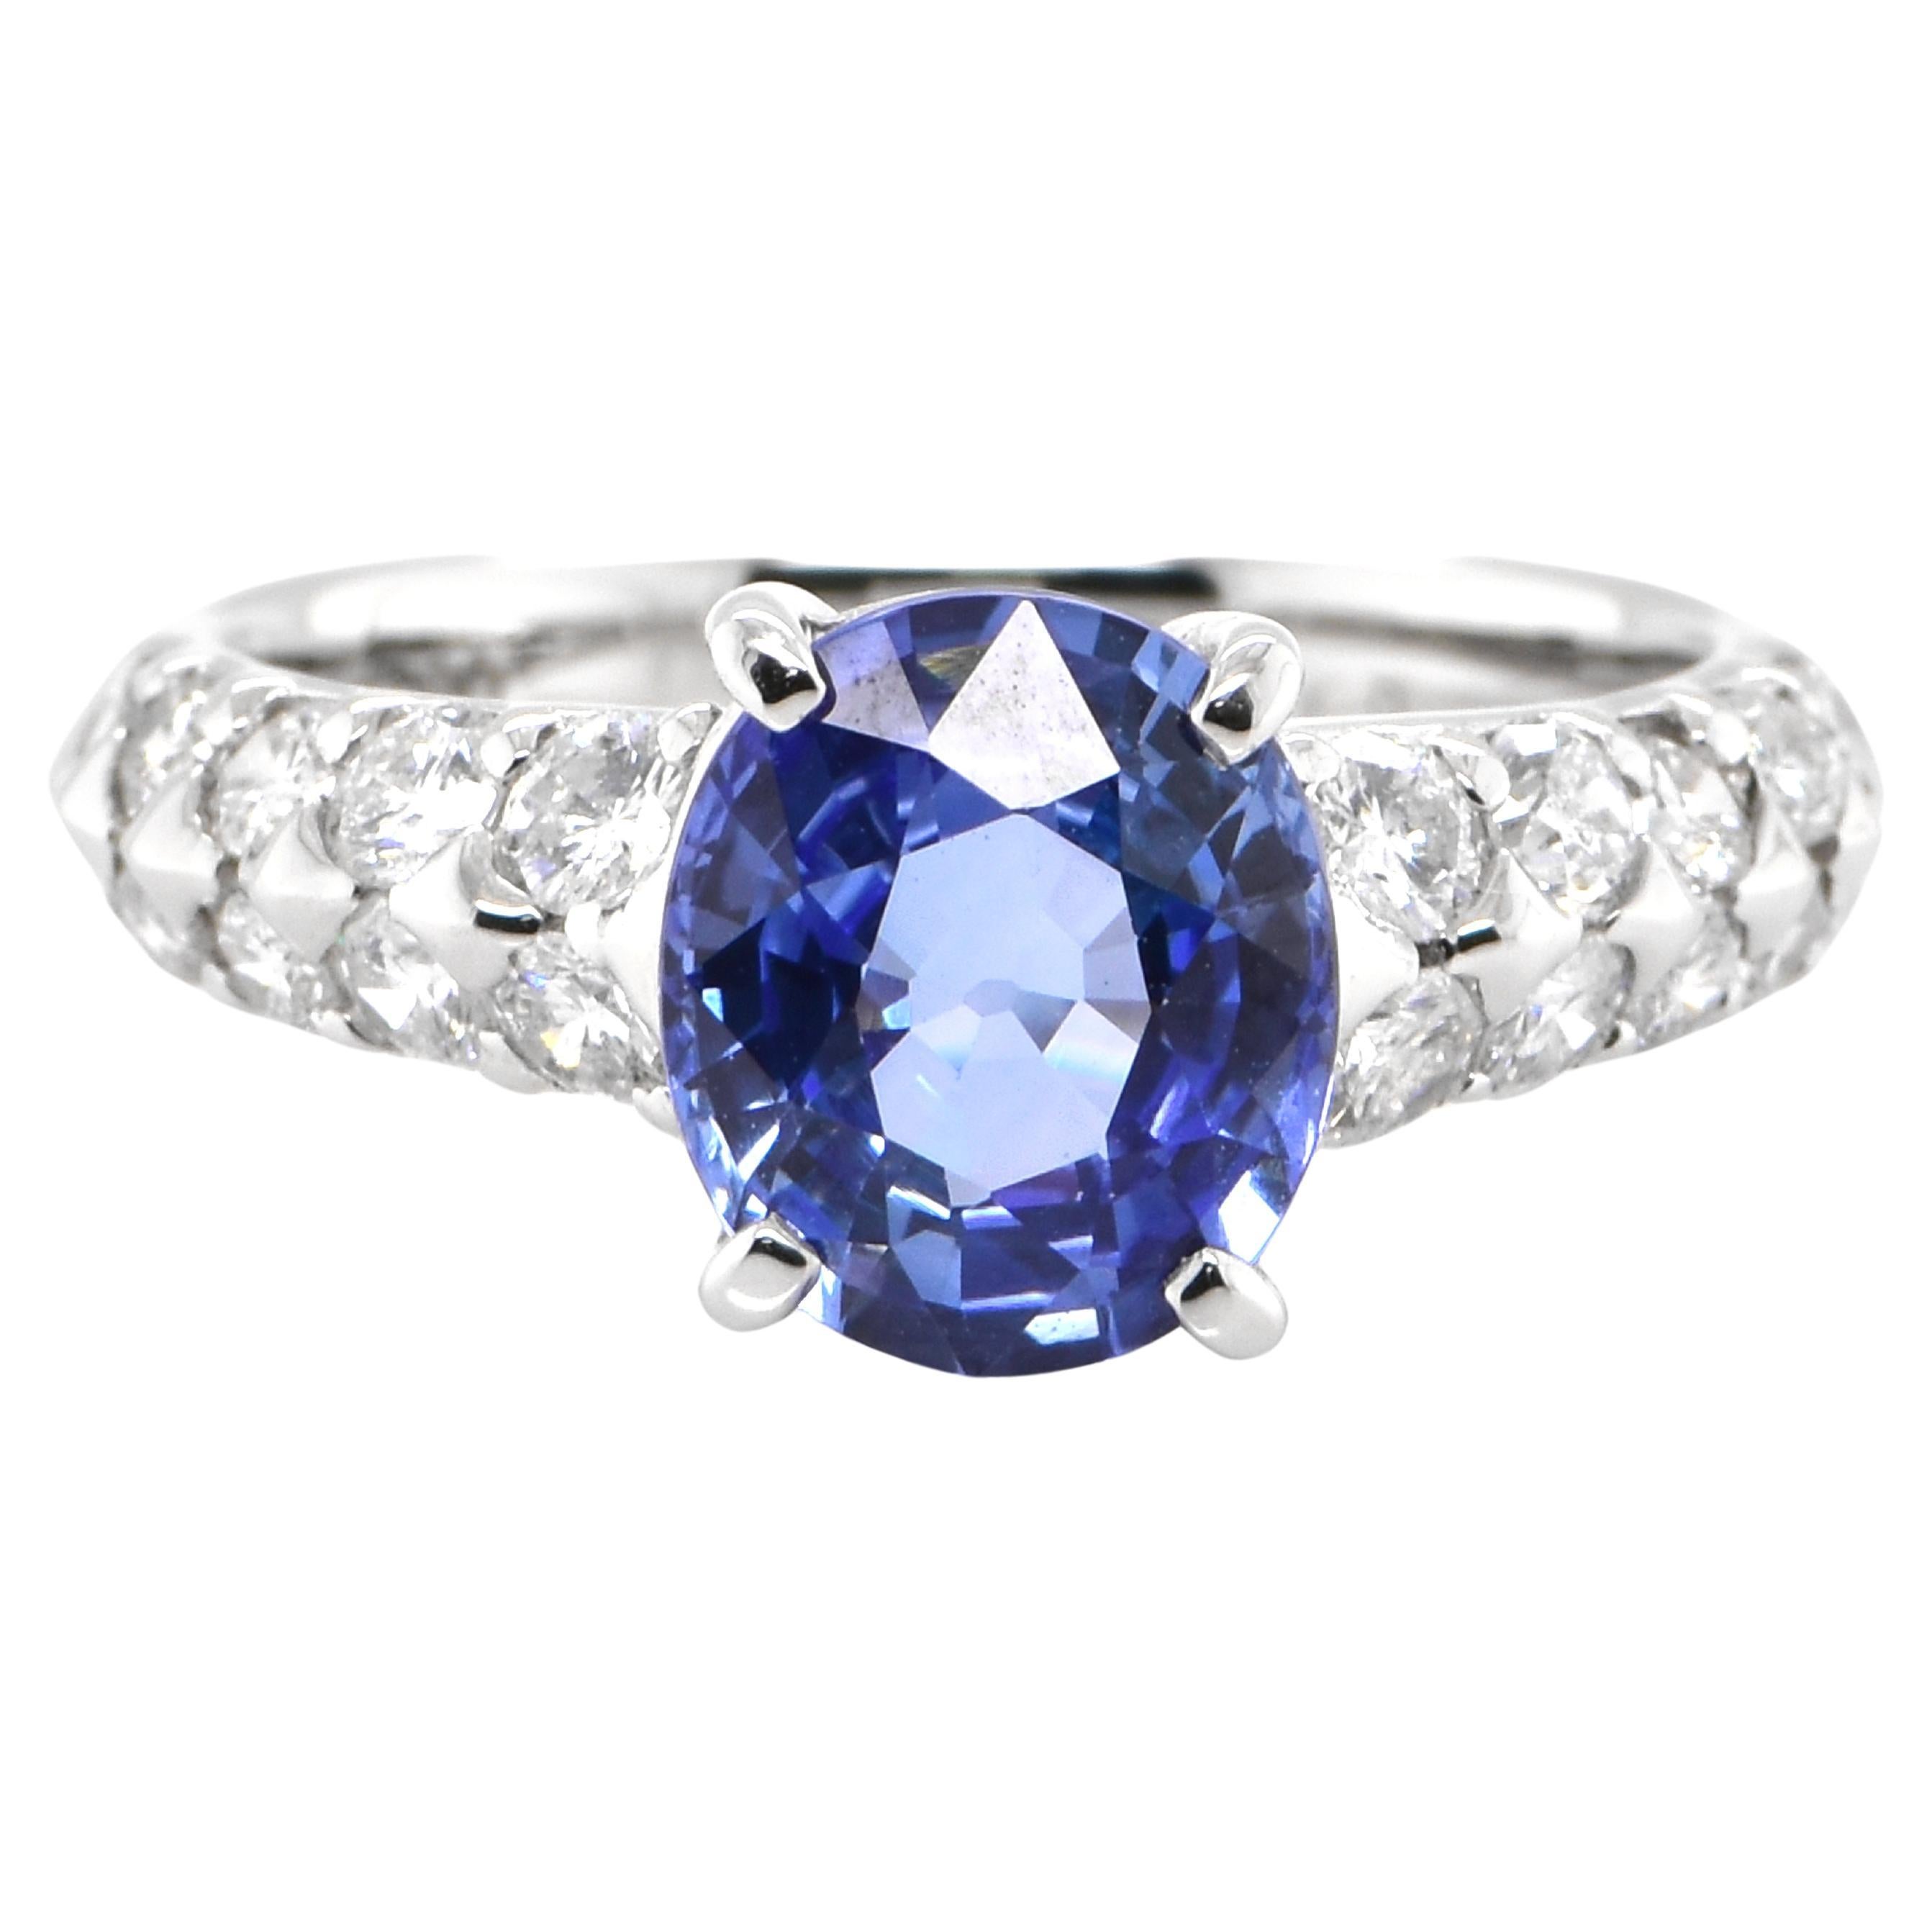 2.17 Carat Natural 'Cornflower Blue' Sapphire and Diamond Made in Platinum For Sale